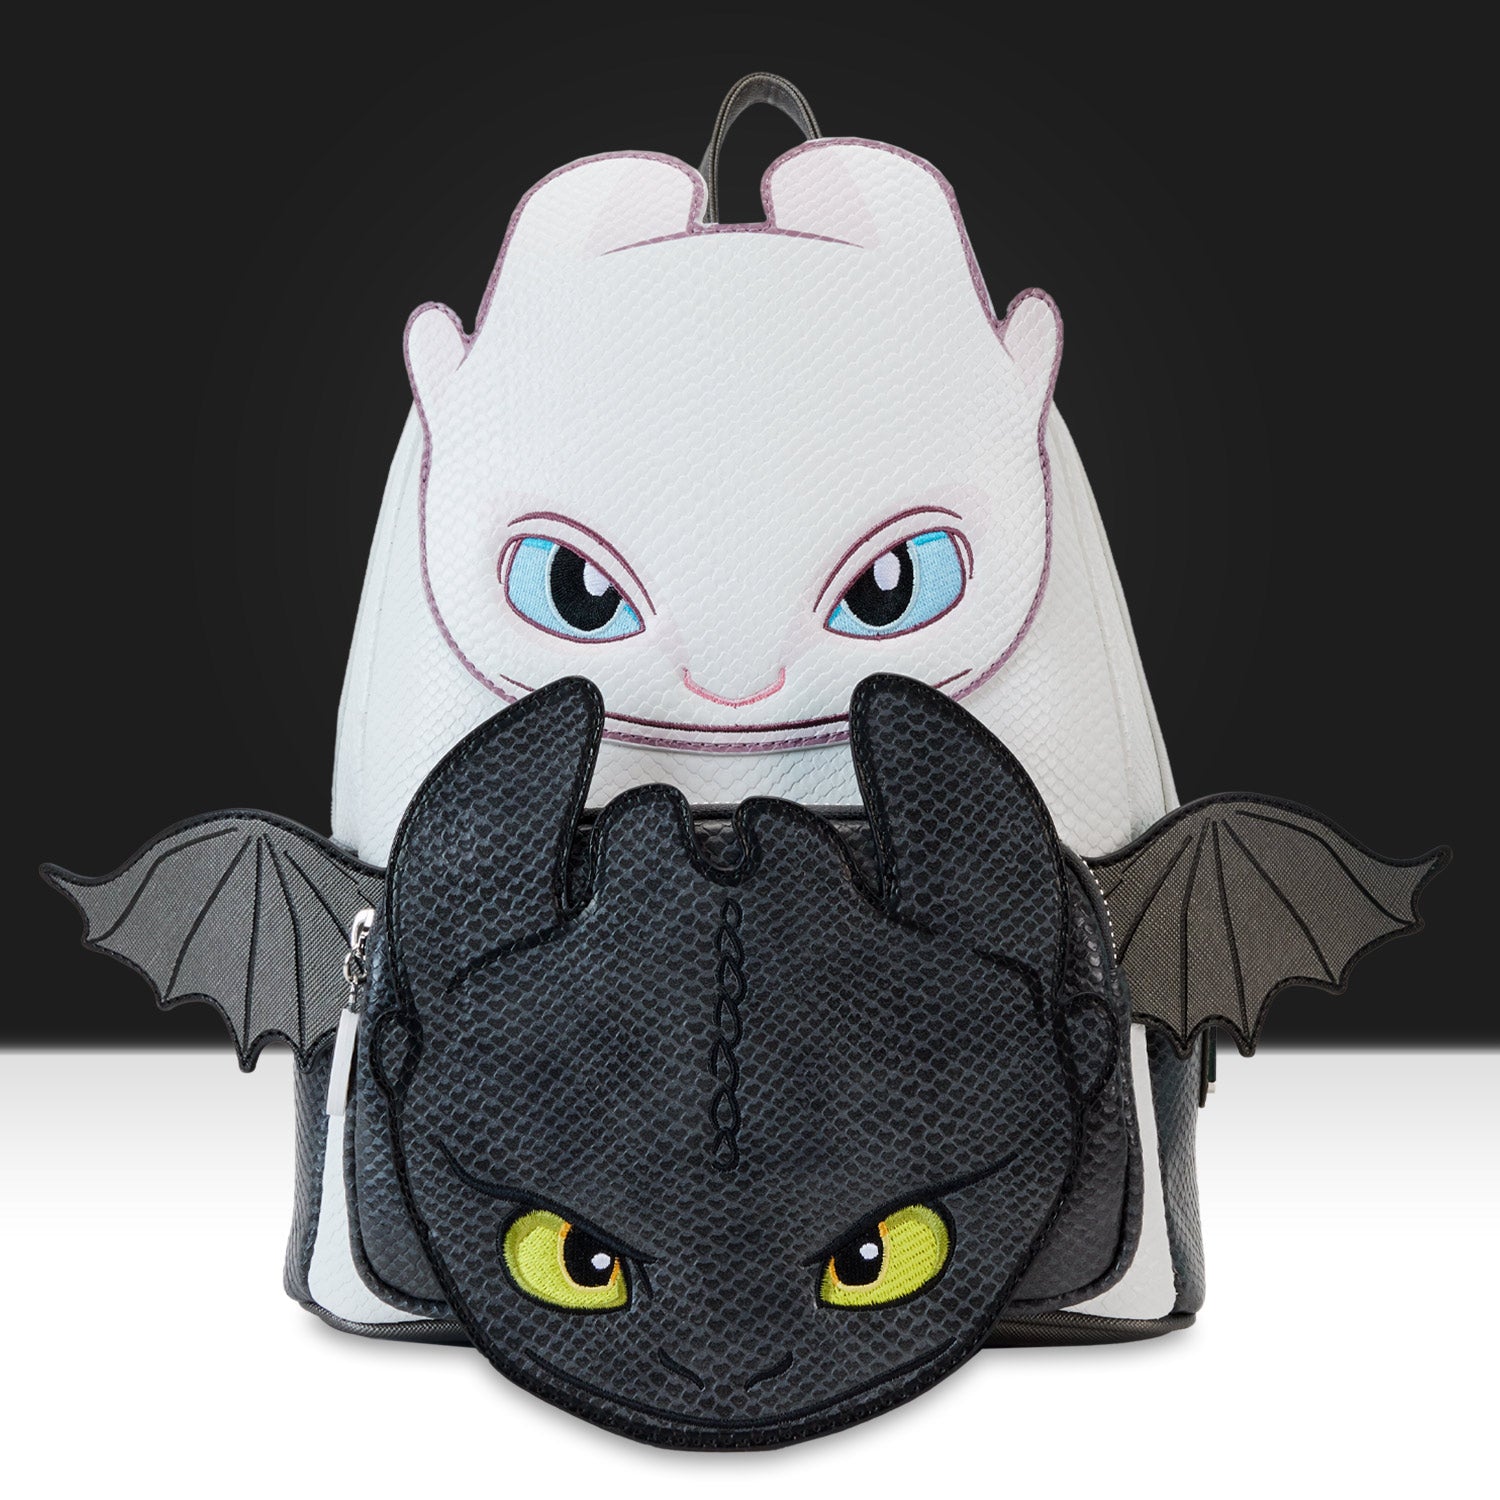 Loungefly x Dreamworks How To Train Your Dragon Furies Mini Backpack